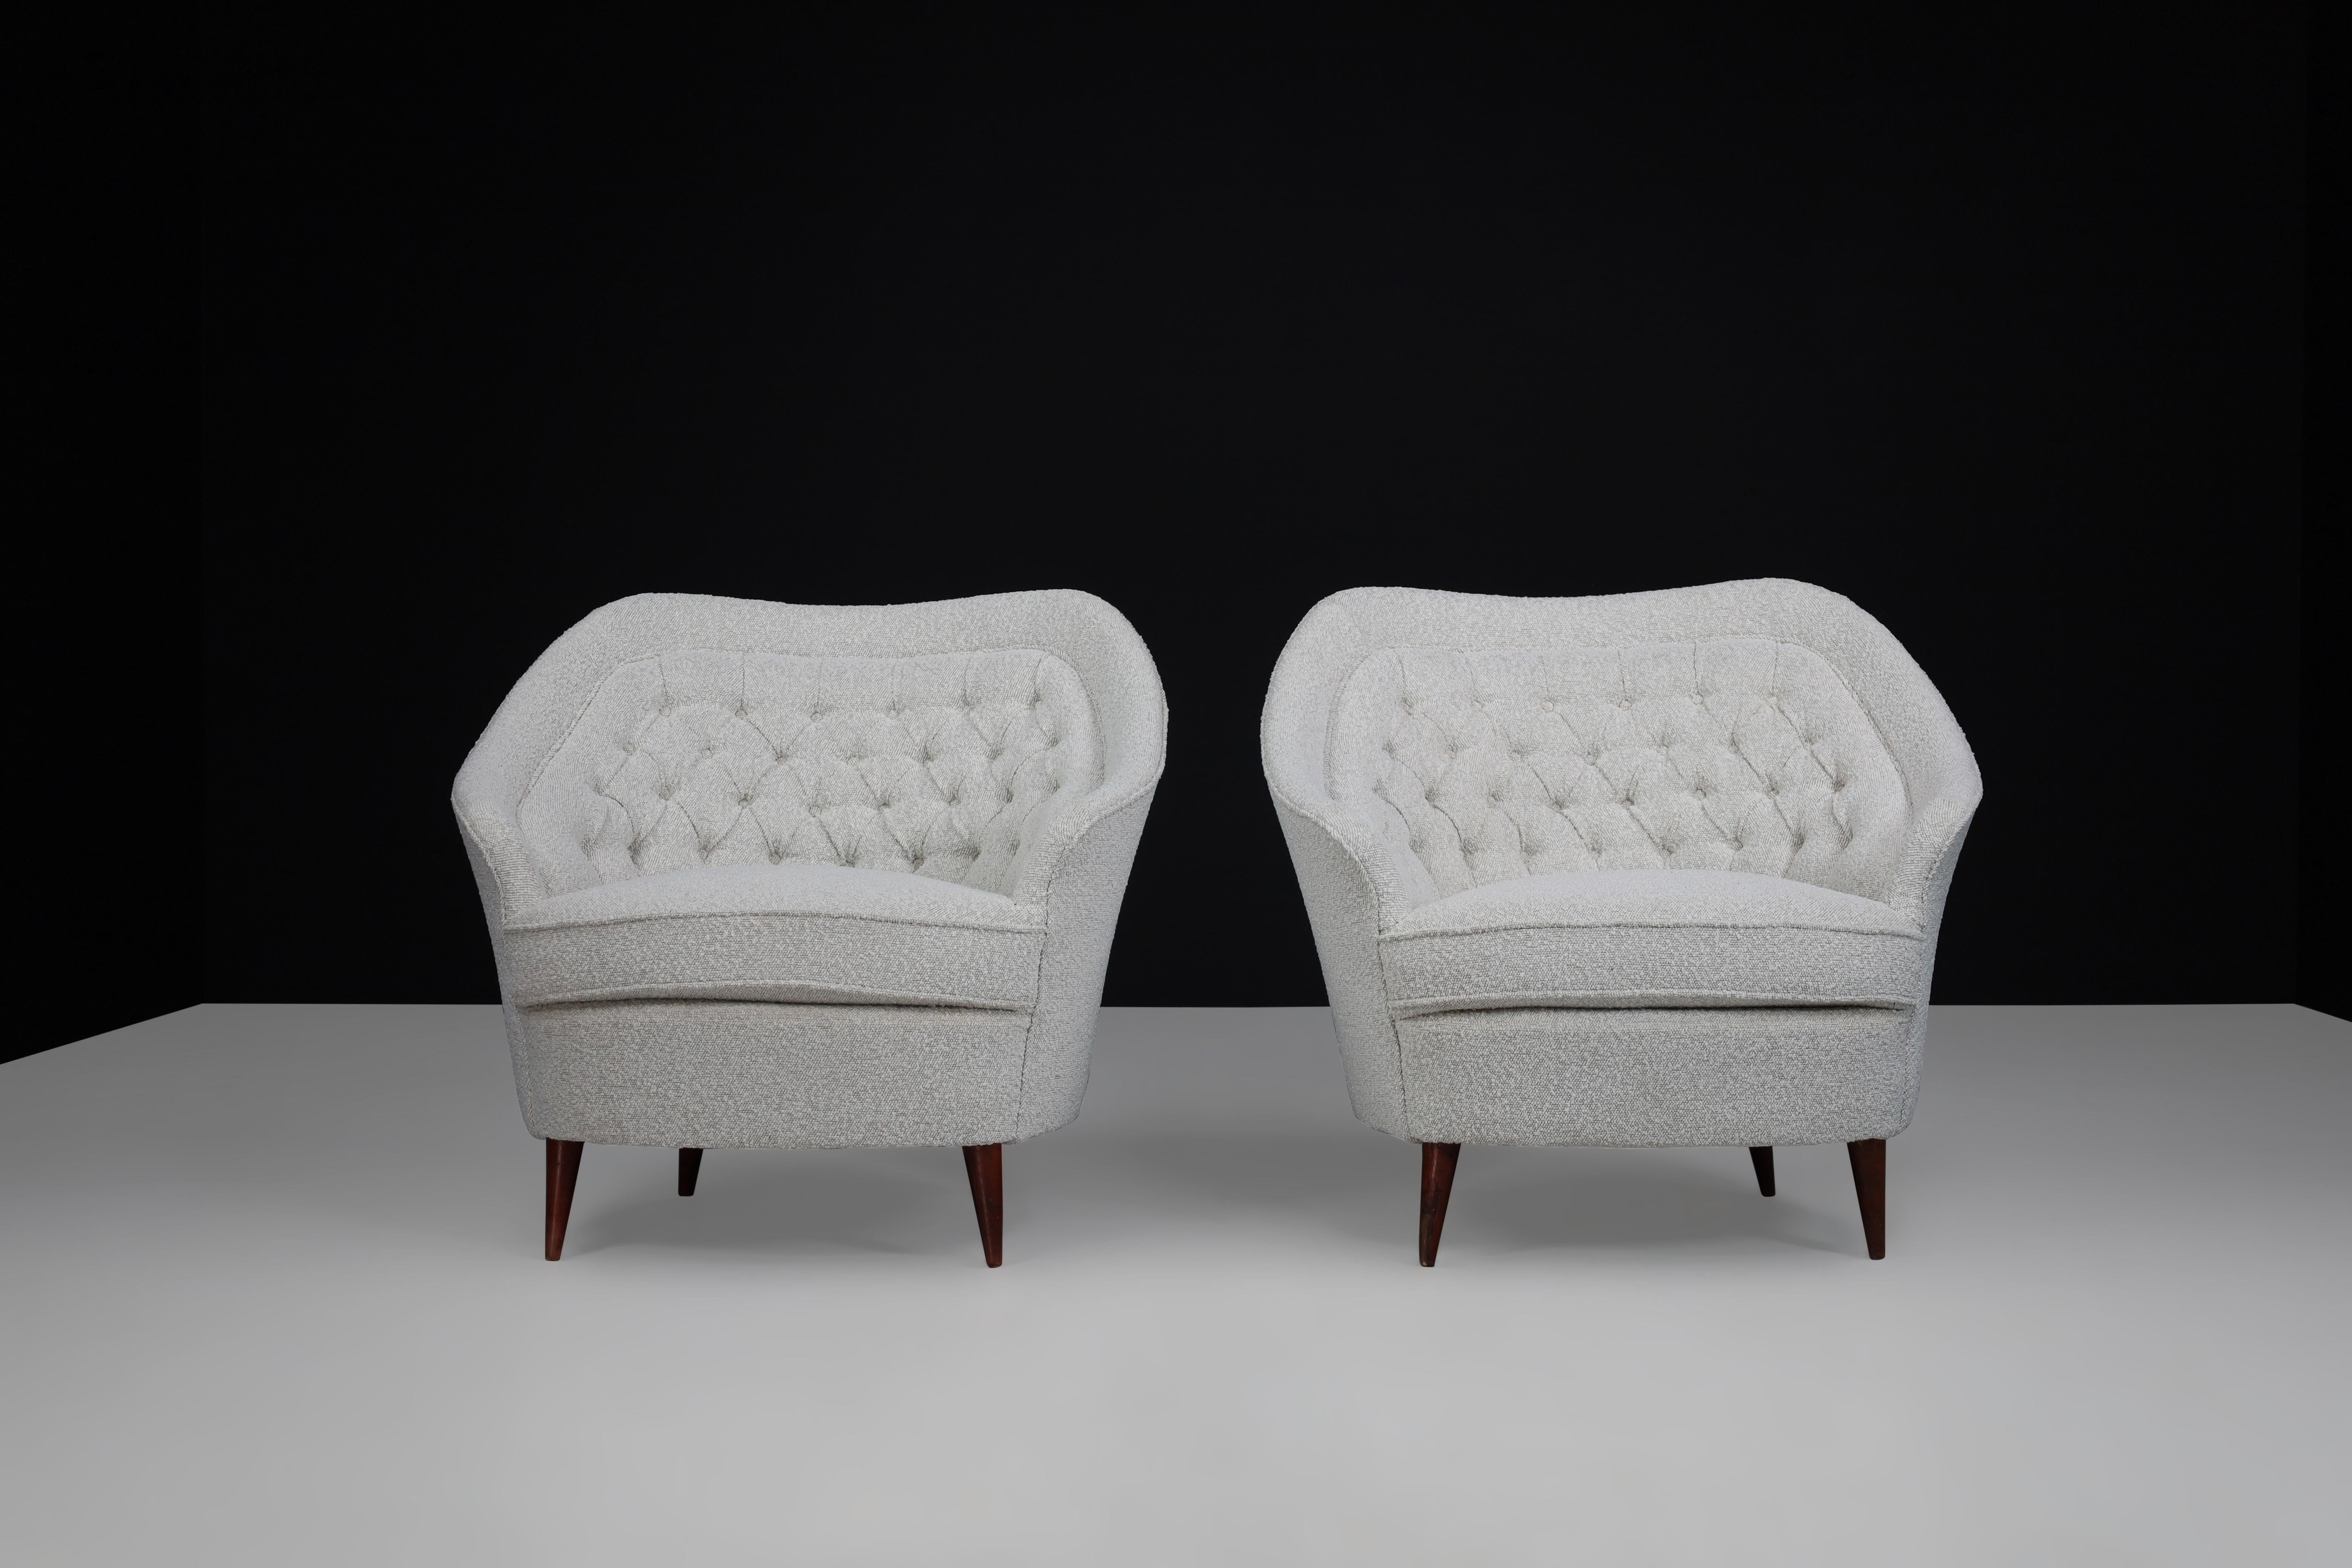 Gio Ponti for Casa E Giardino Midcentury Armchairs in Bouclé Upholstery, Italy In Good Condition For Sale In Almelo, NL